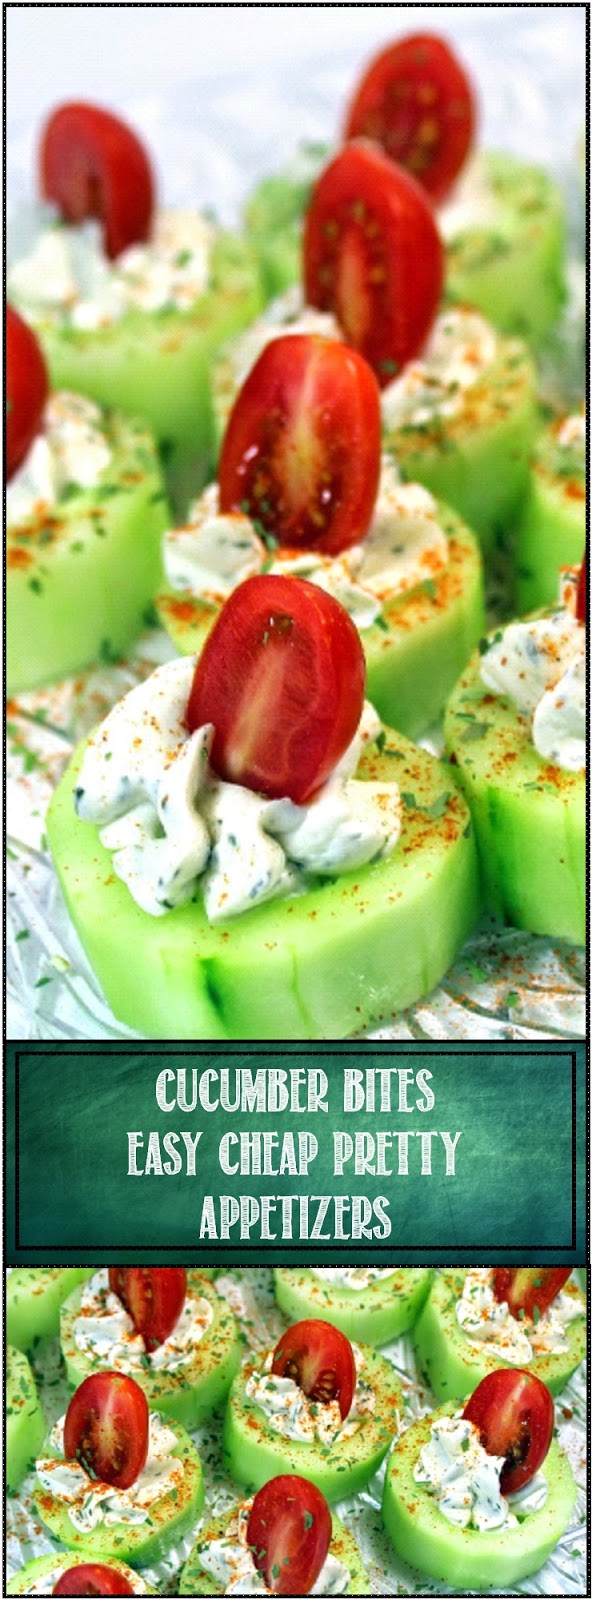 52 Ways to Cook: Cucumber Bites with Herb Cream Cheese and Cherry ...